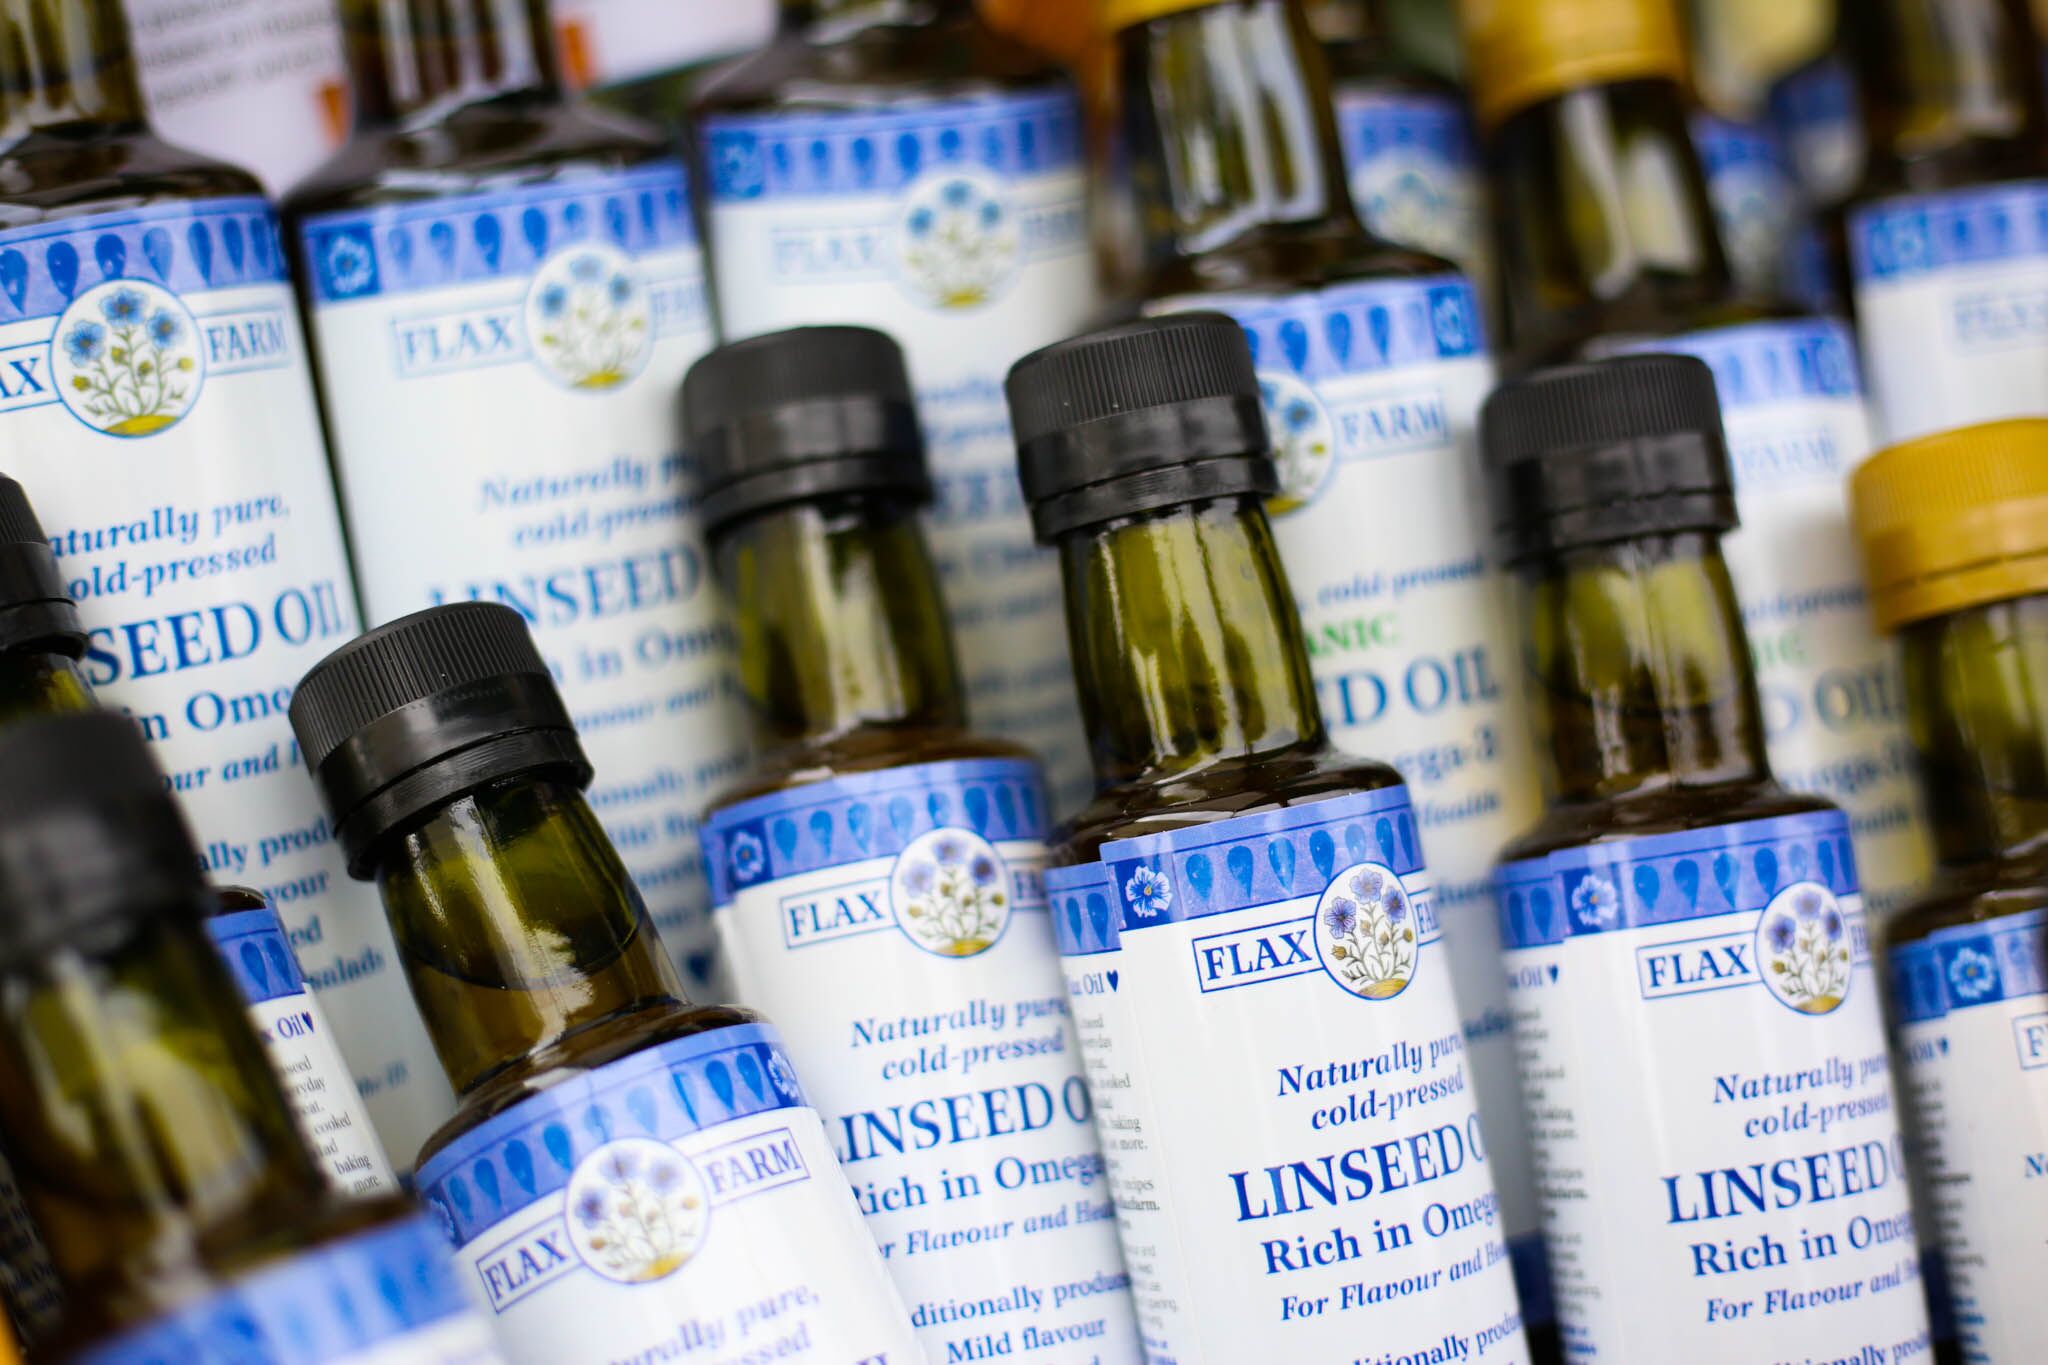 Linseed oil can be used for a healthy stir-fry